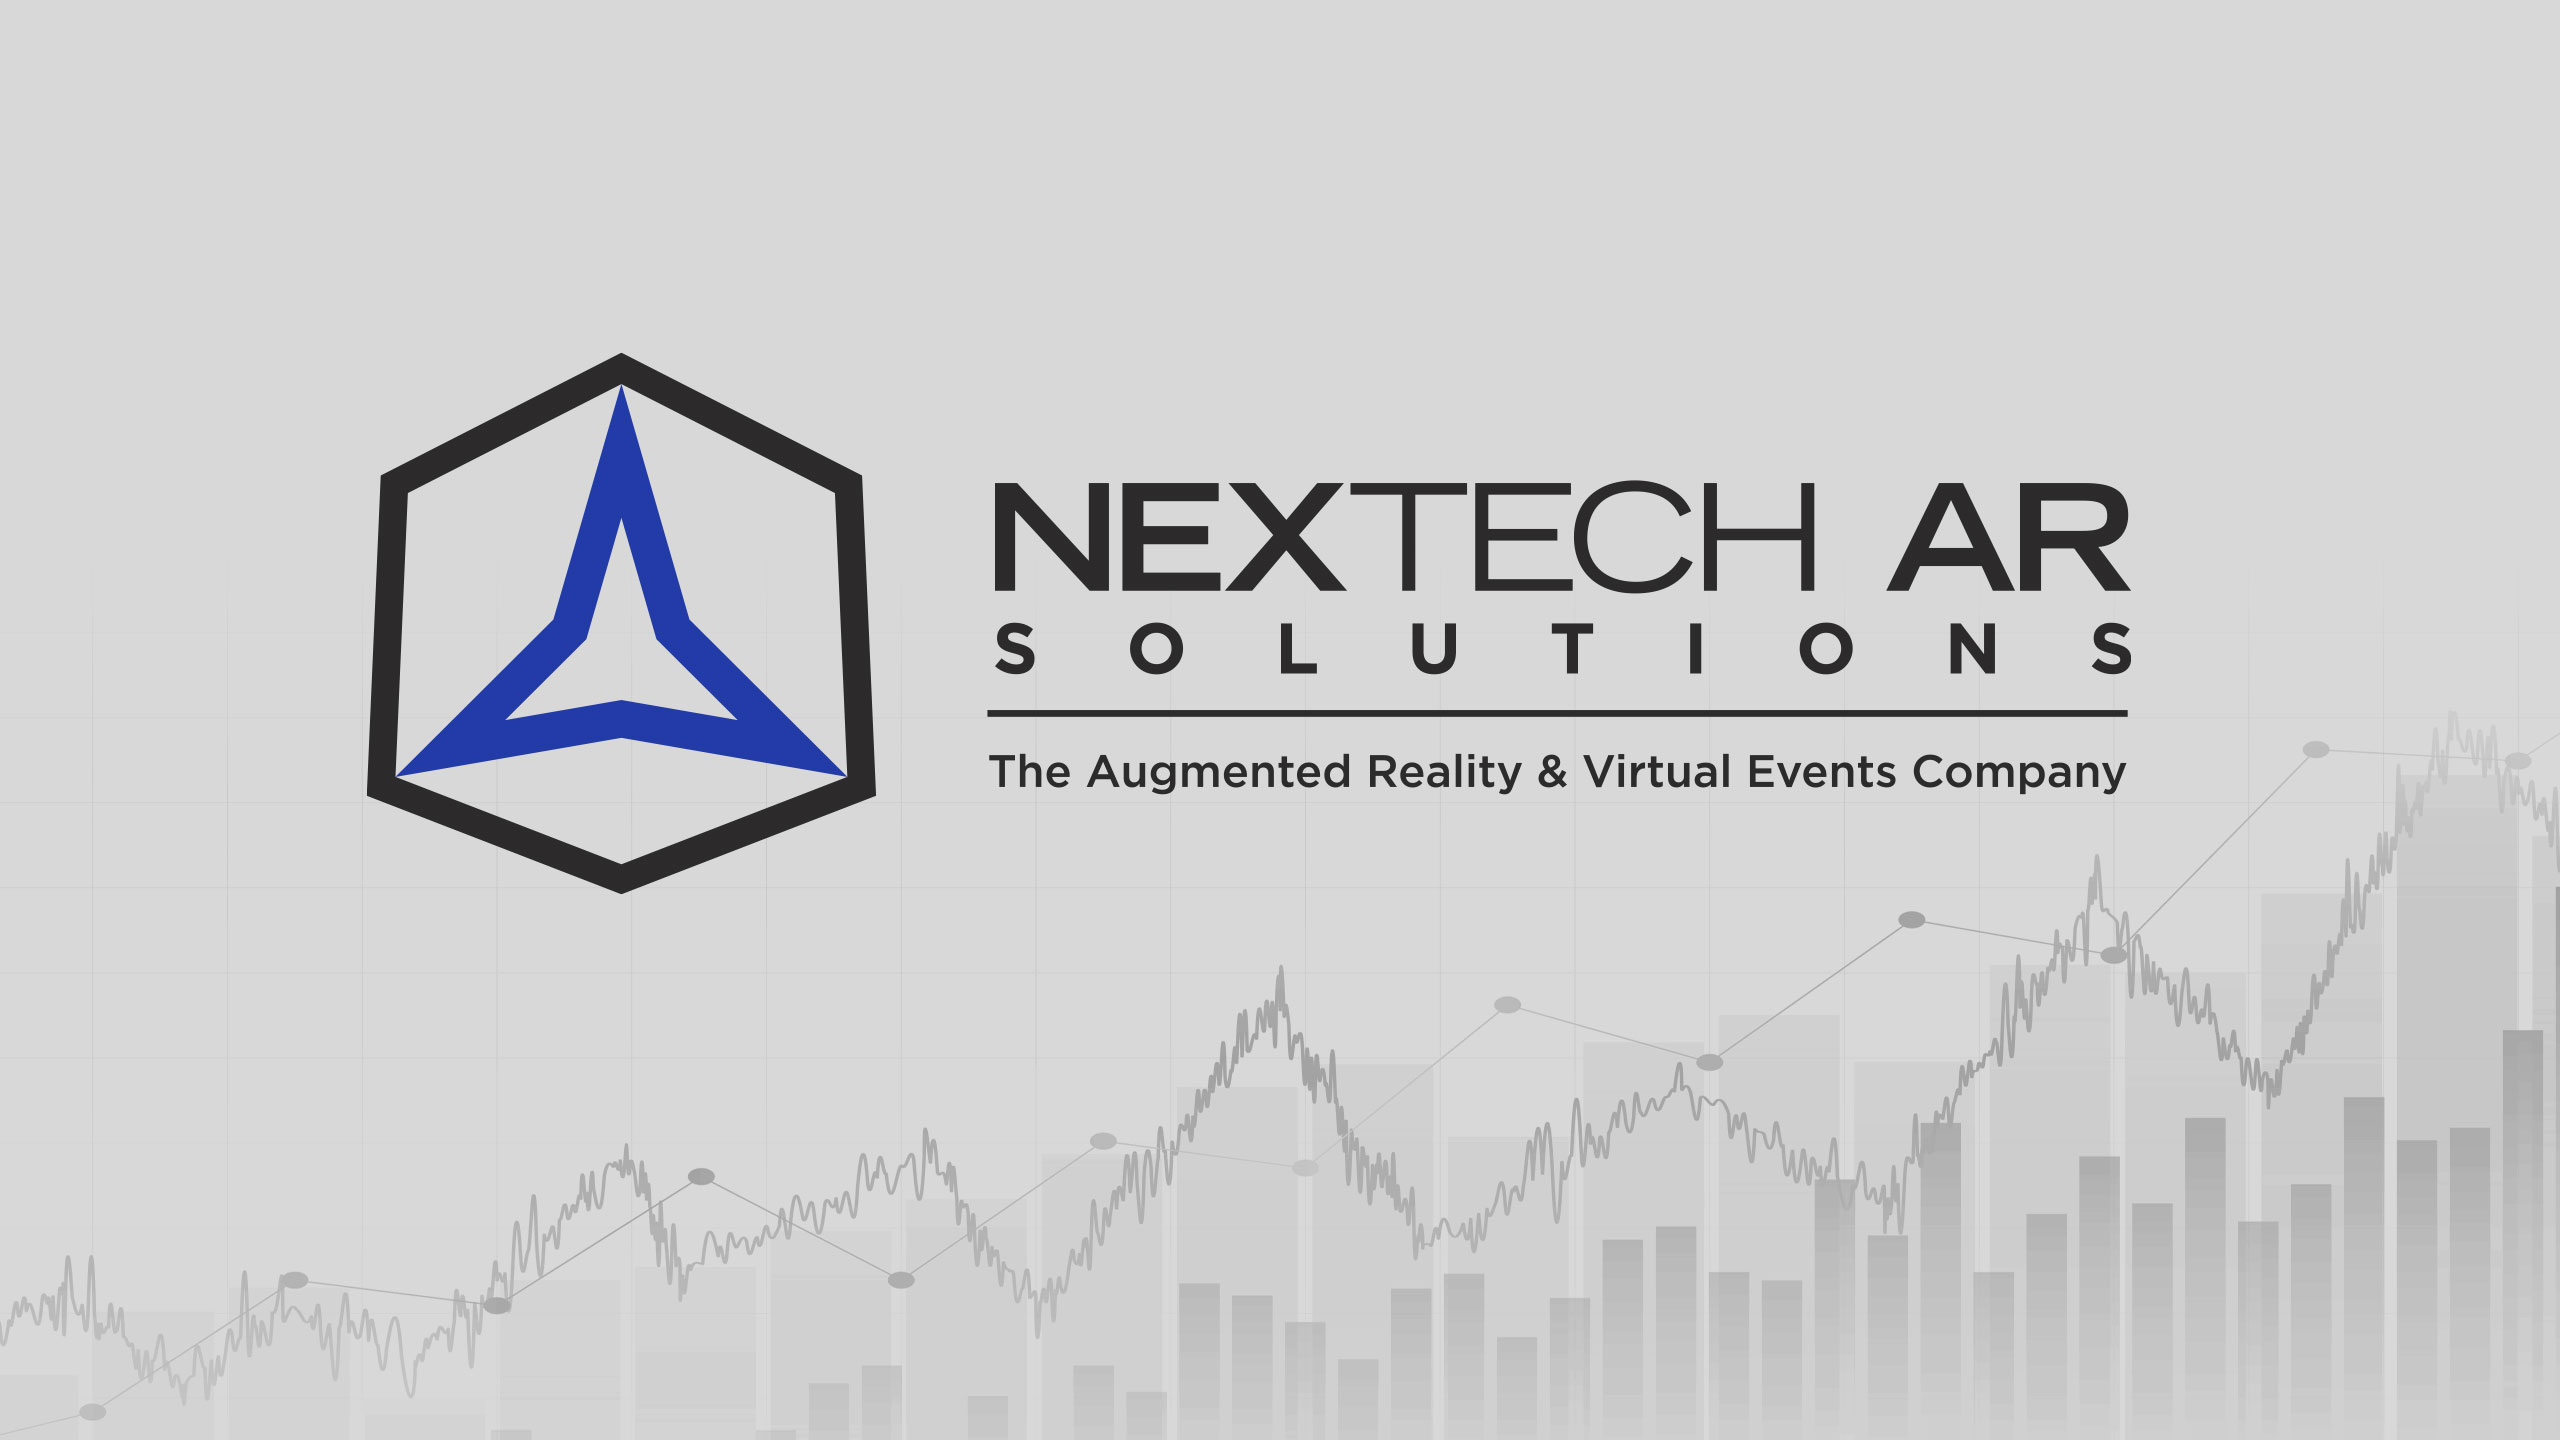 Nextech AR Solutions logo with chart